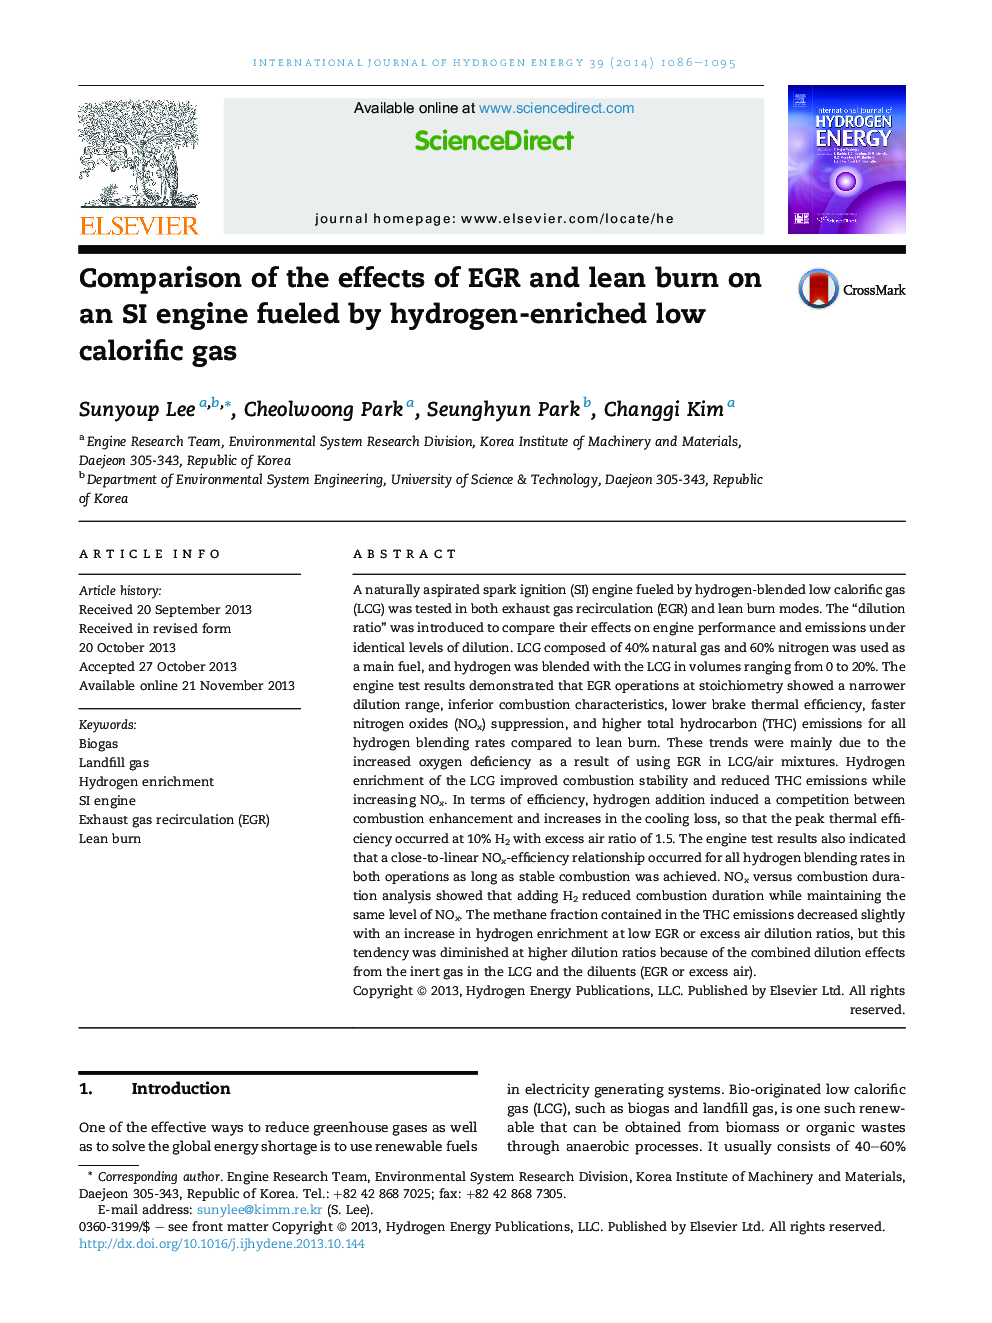 Comparison of the effects of EGR and lean burn on an SI engine fueled by hydrogen-enriched low calorific gas